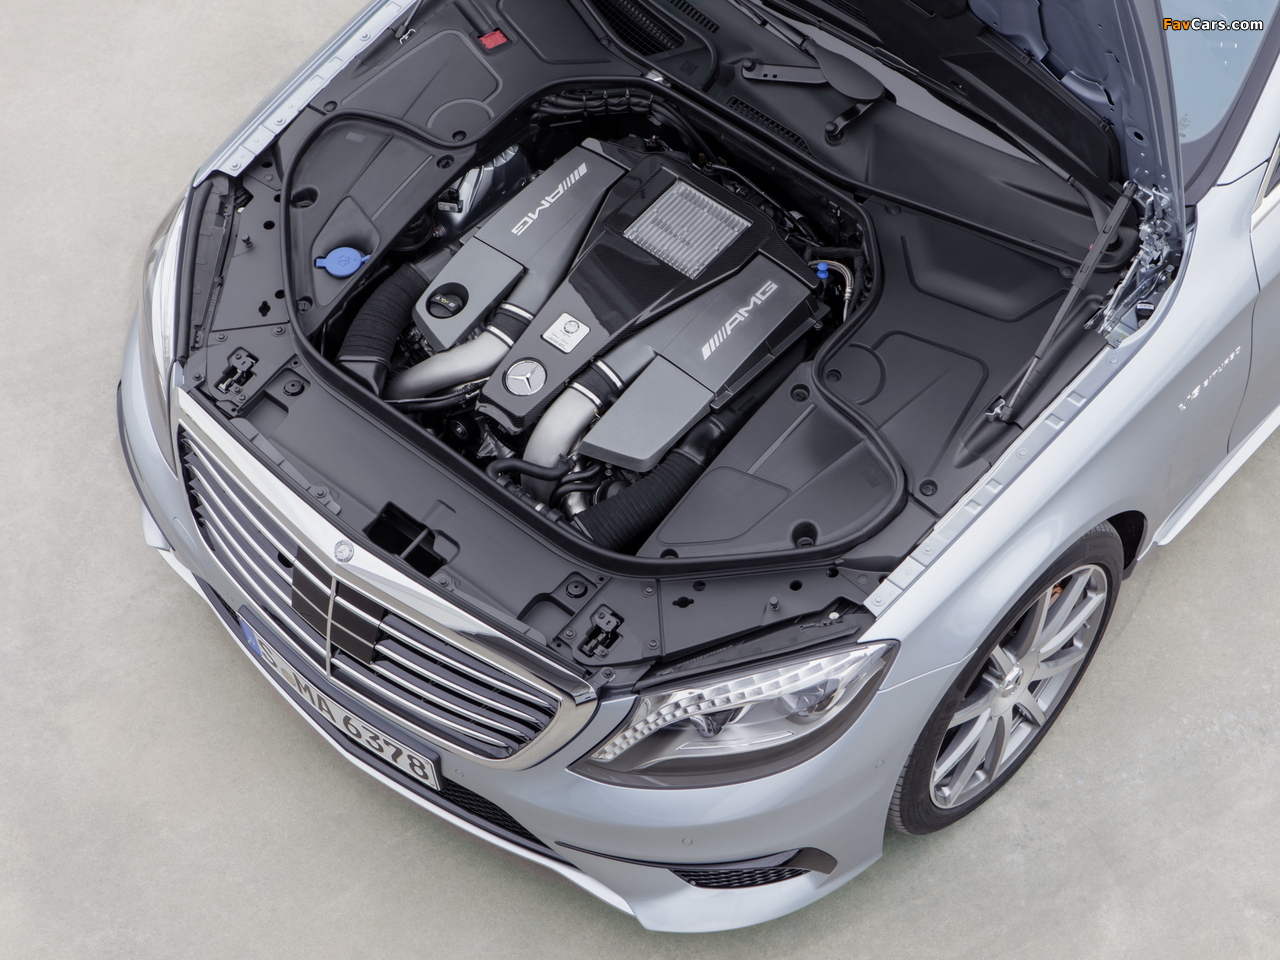 Mercedes-Benz S 63 AMG (W222) 2013 pictures (1280 x 960)